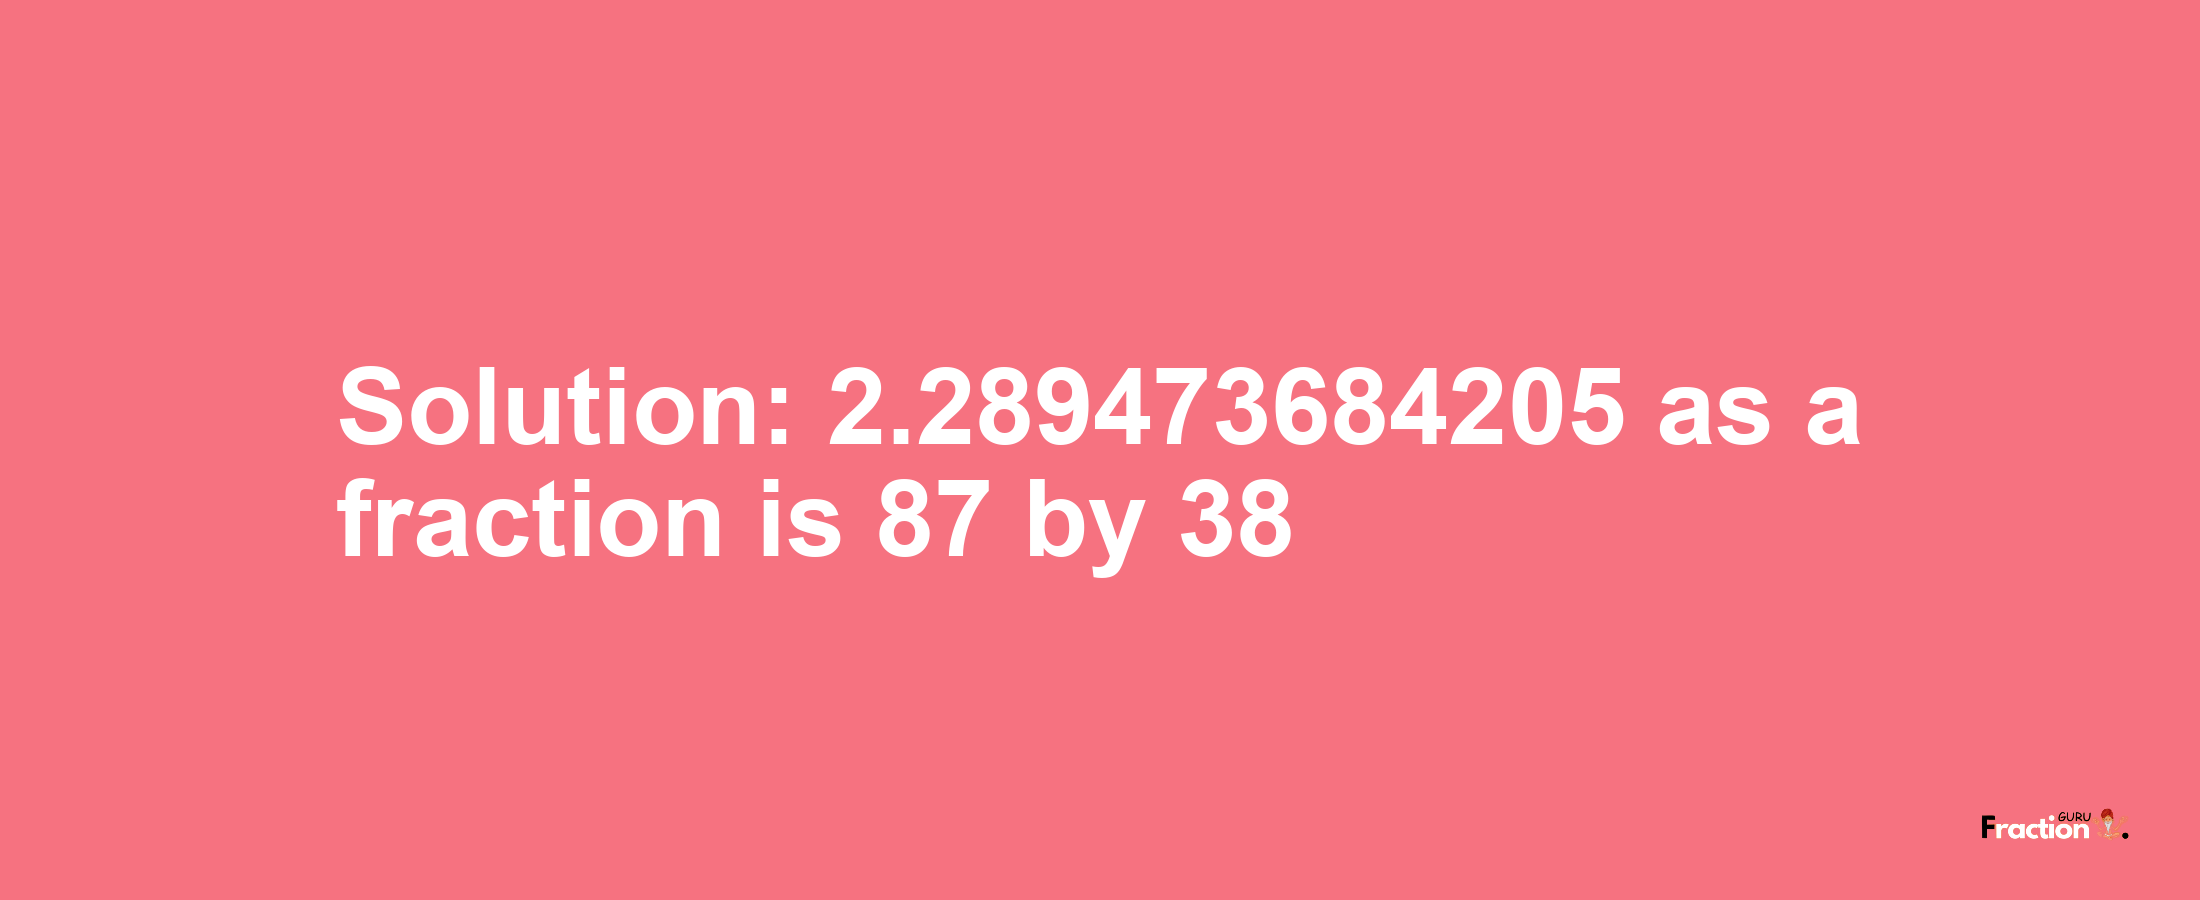 Solution:2.289473684205 as a fraction is 87/38